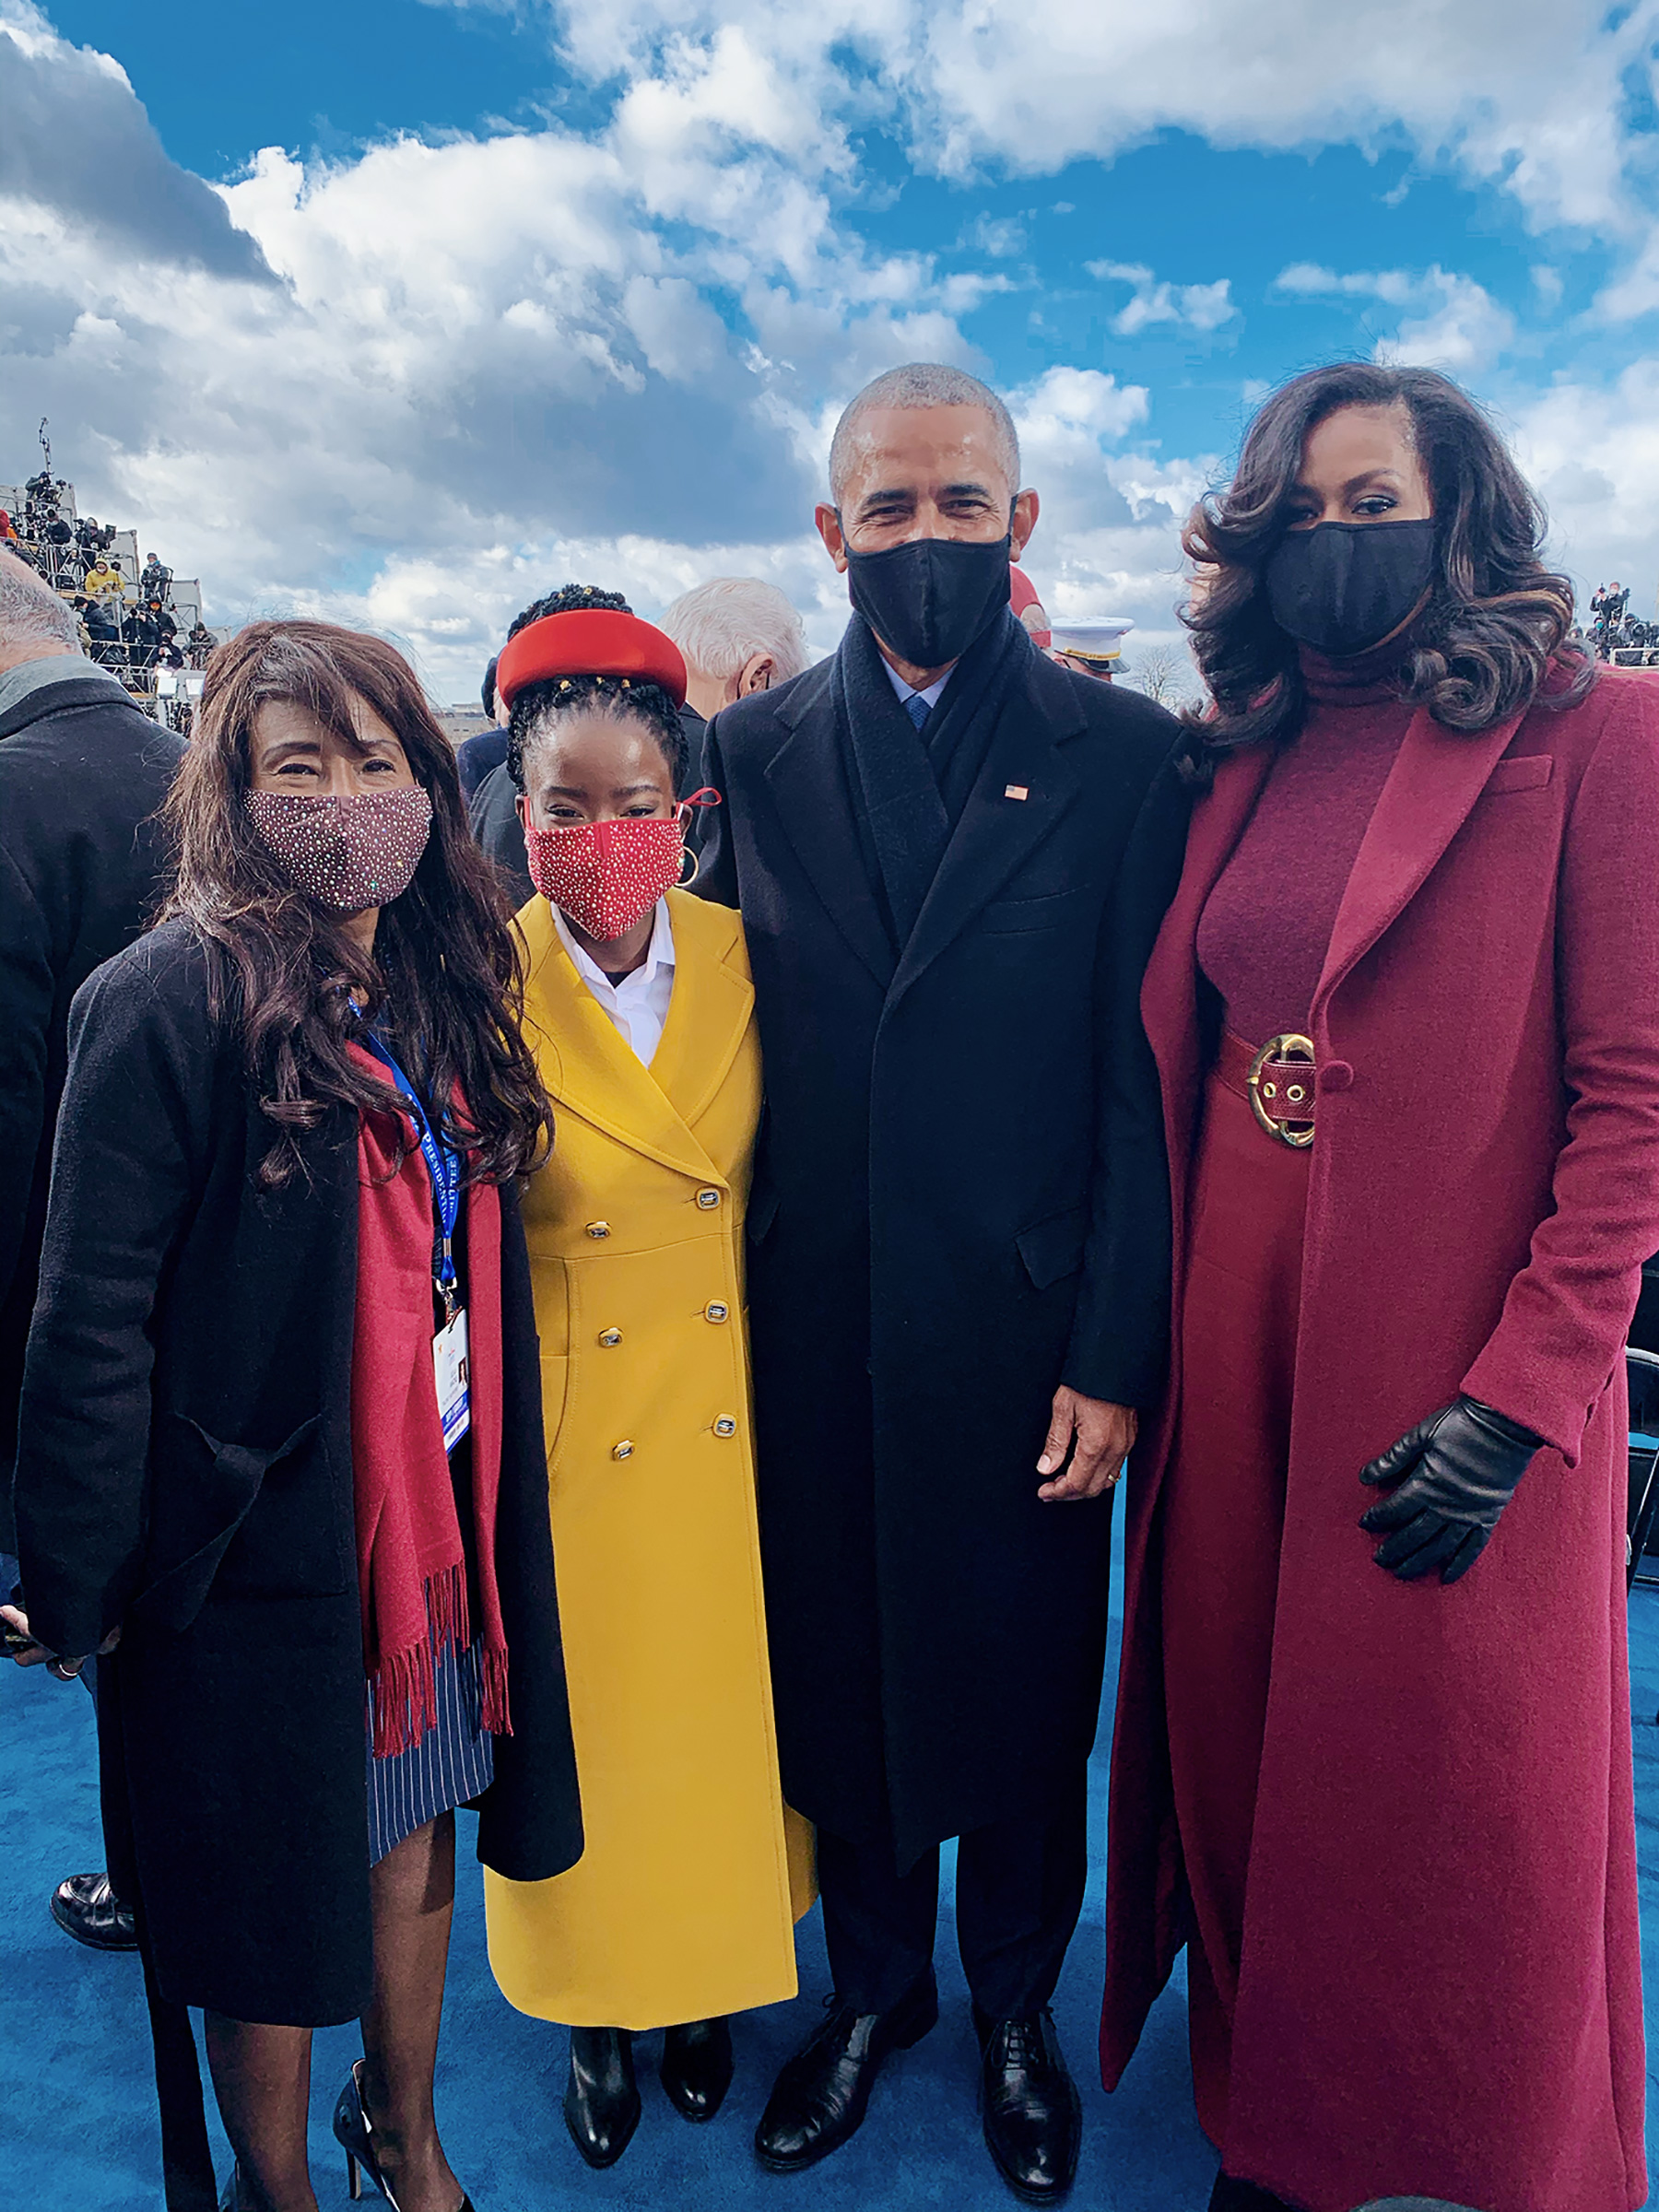 Gorman and her mother Joan Wicks with the Obamas at the Inauguration (Courtesy Amanda Gorman)